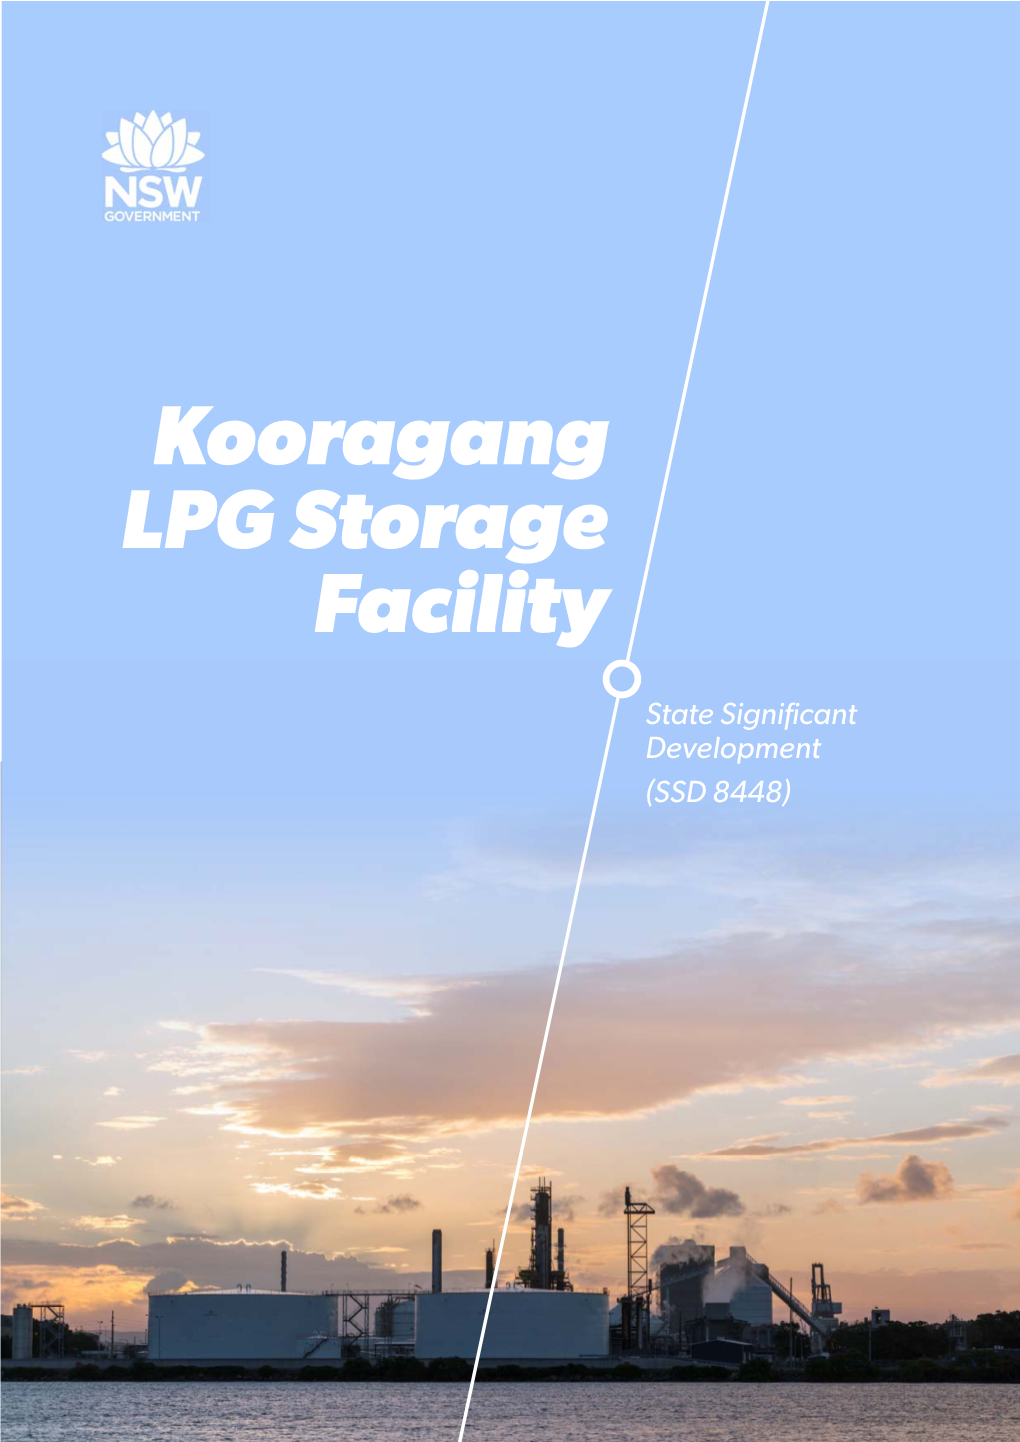 Kooragang LPG Storage Facility State Significant Development (SSD 8448)